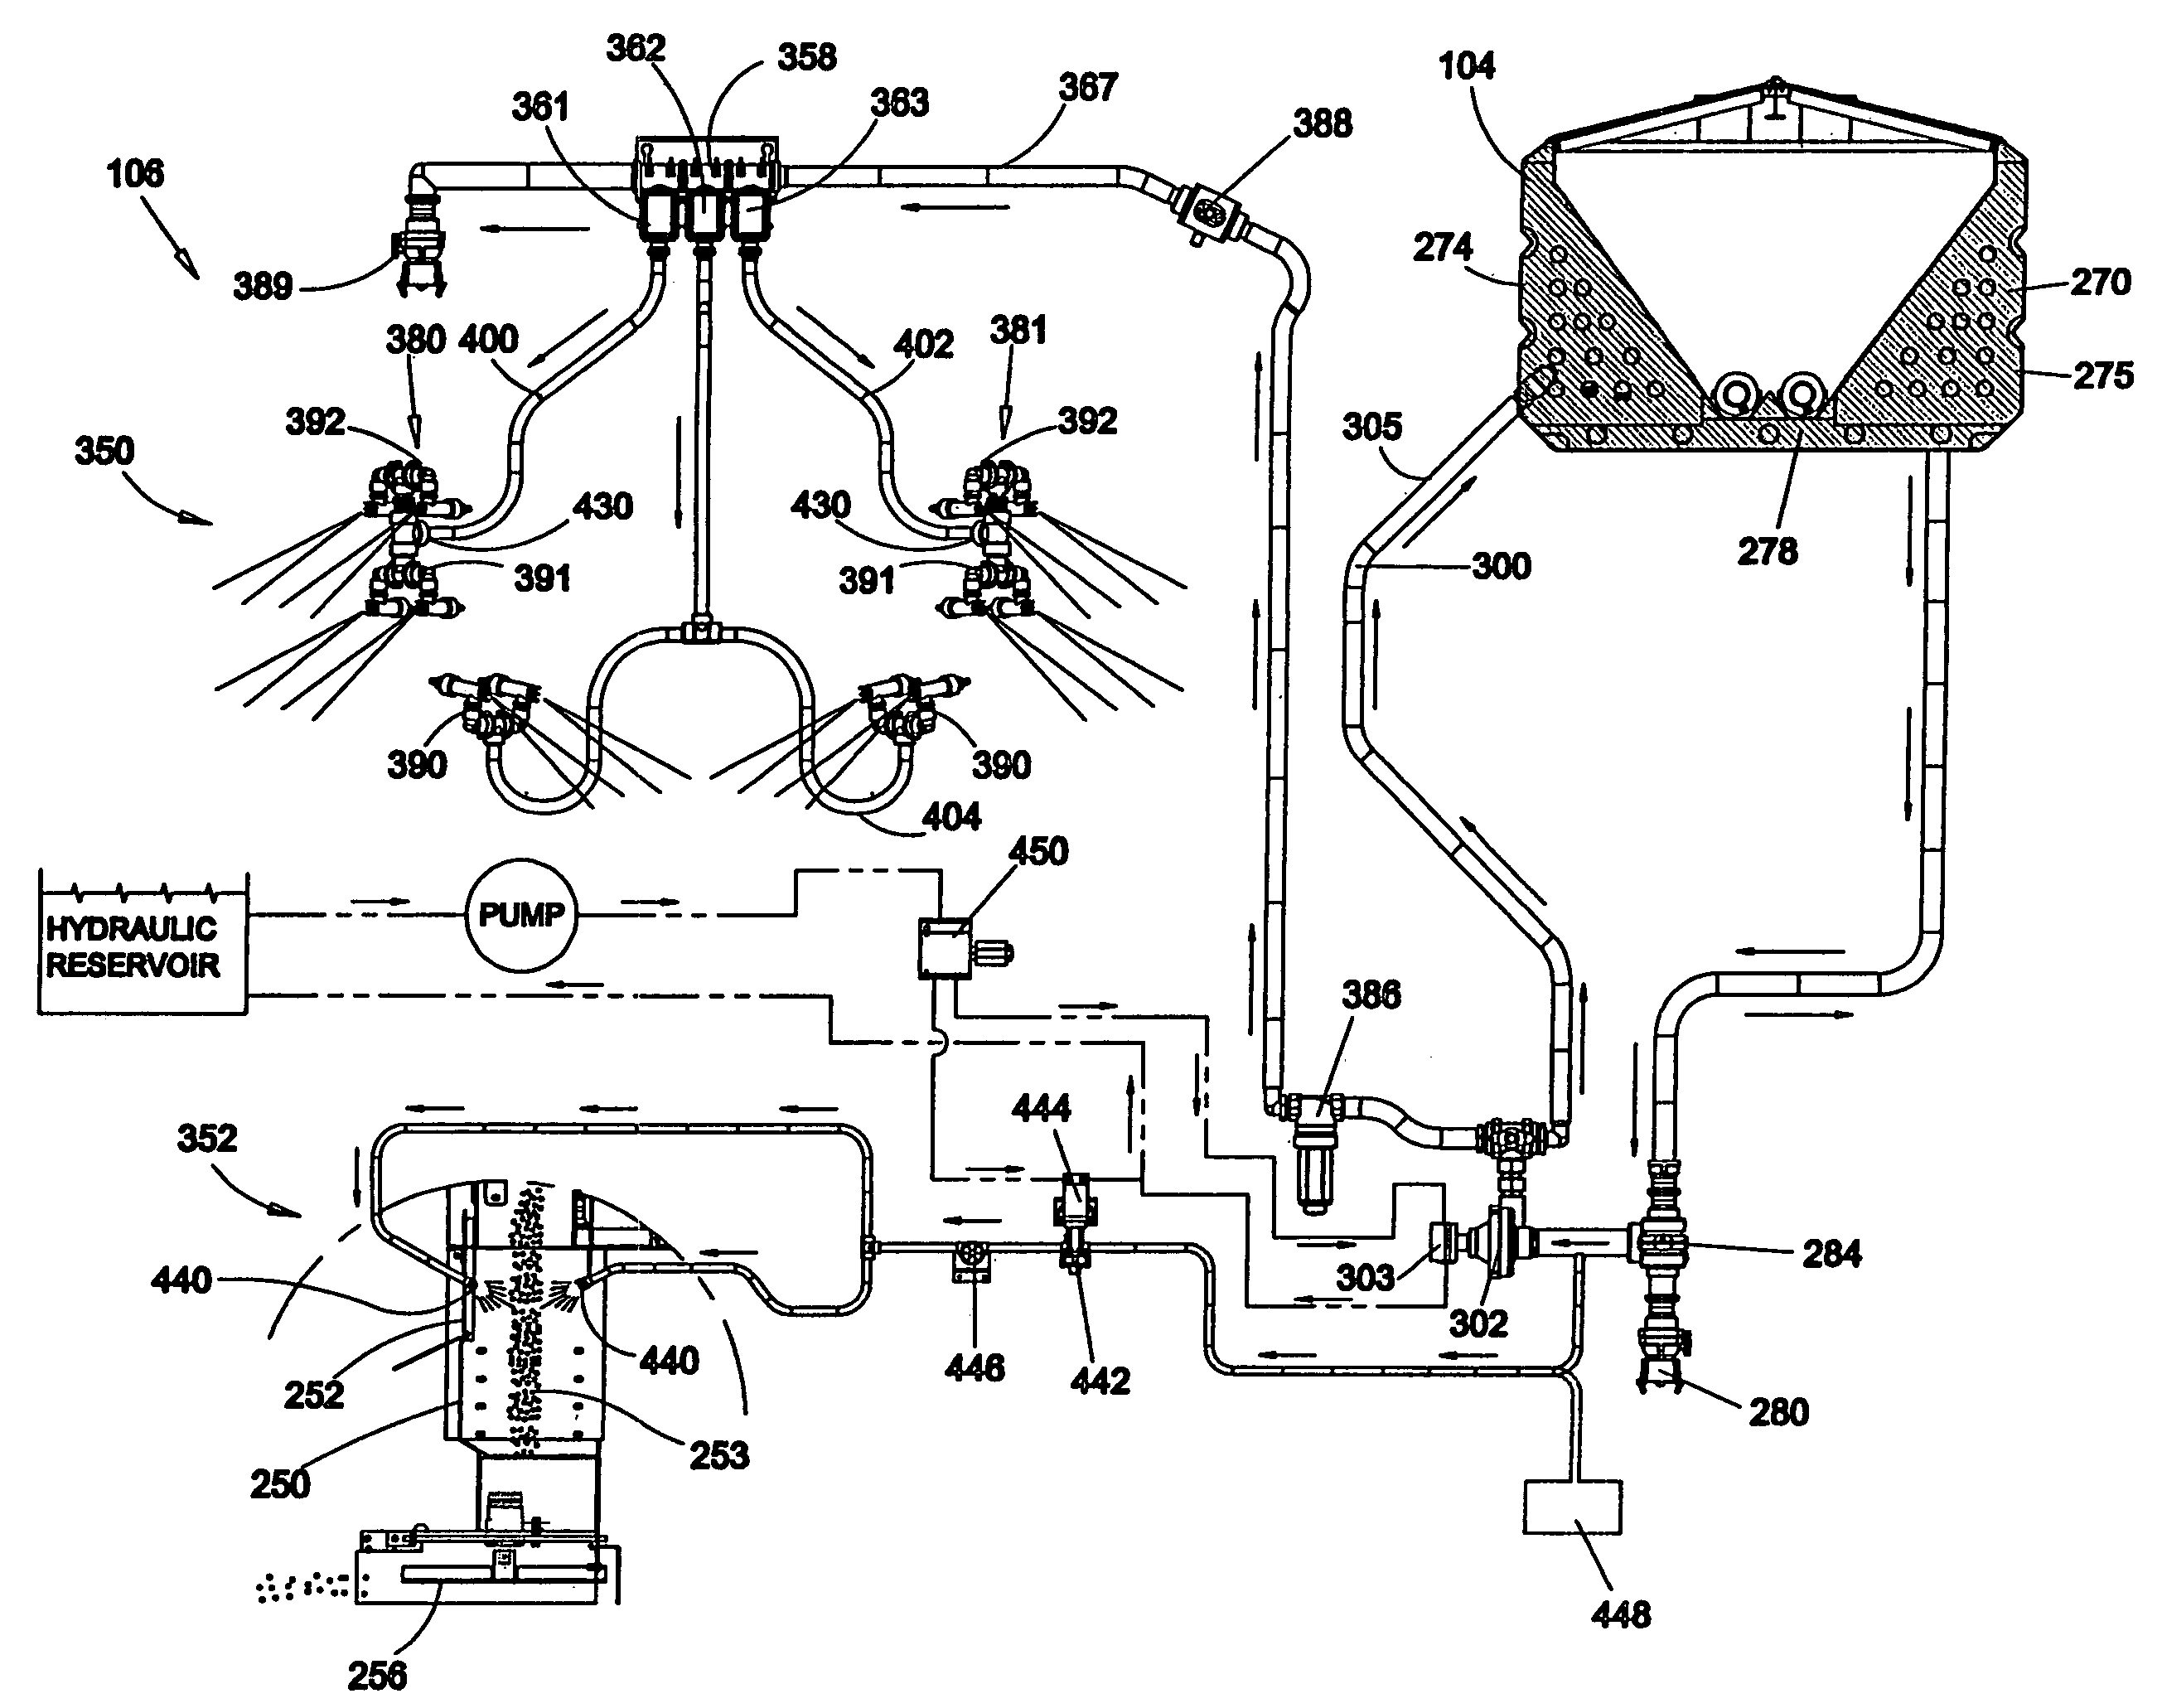 Apparatus for treatment of snow and ice